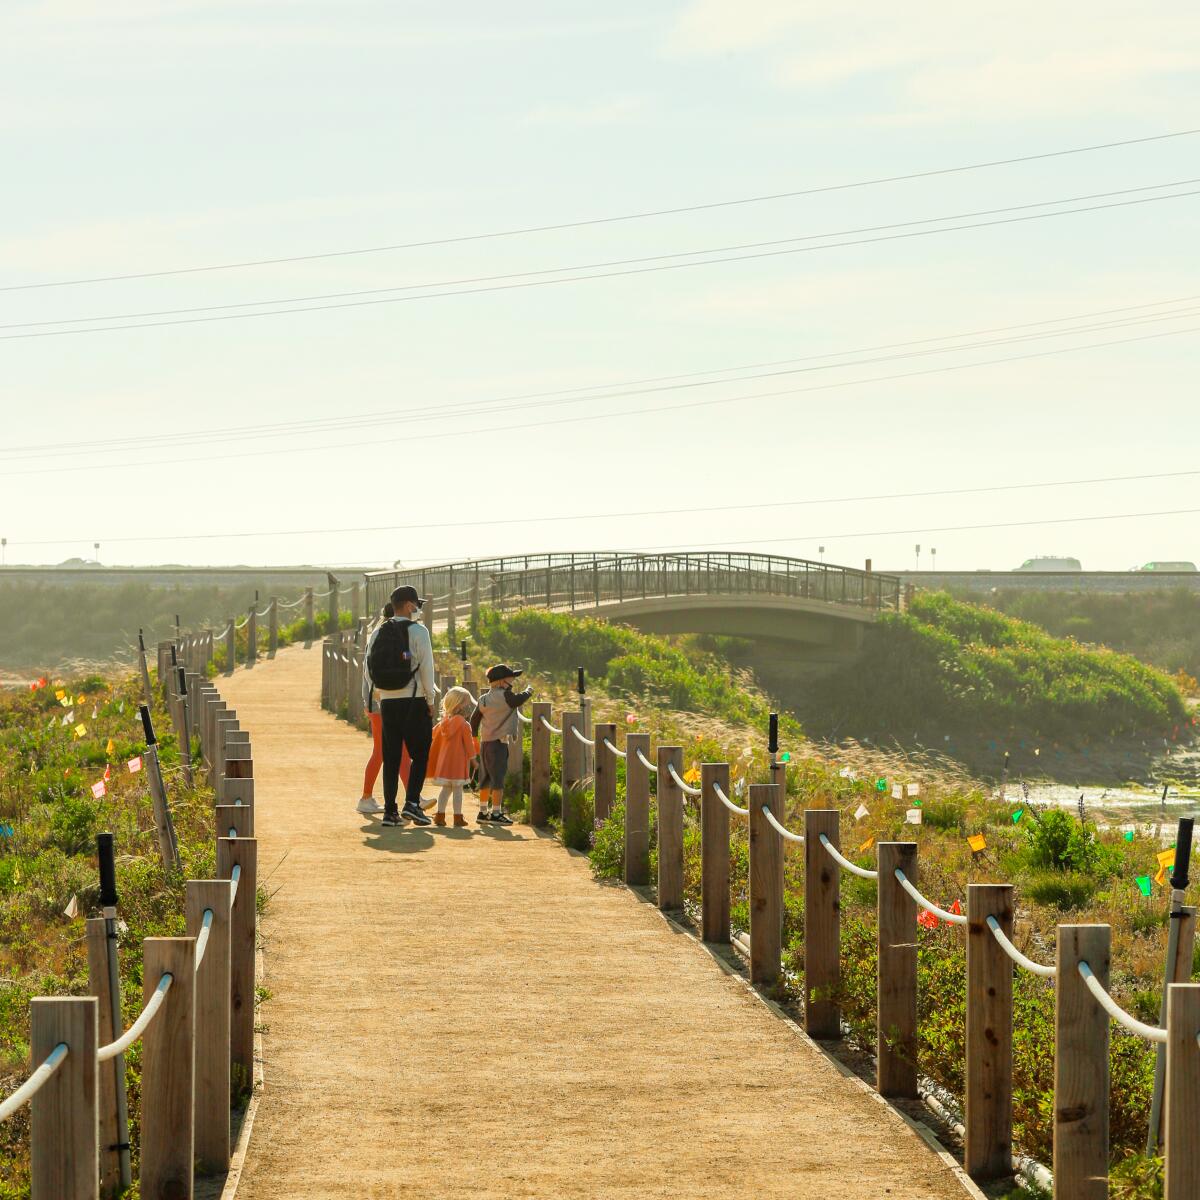 A new bridge connects Solana Beach and Cardiff-by-the-Sea over the San Elijo Lagoon.